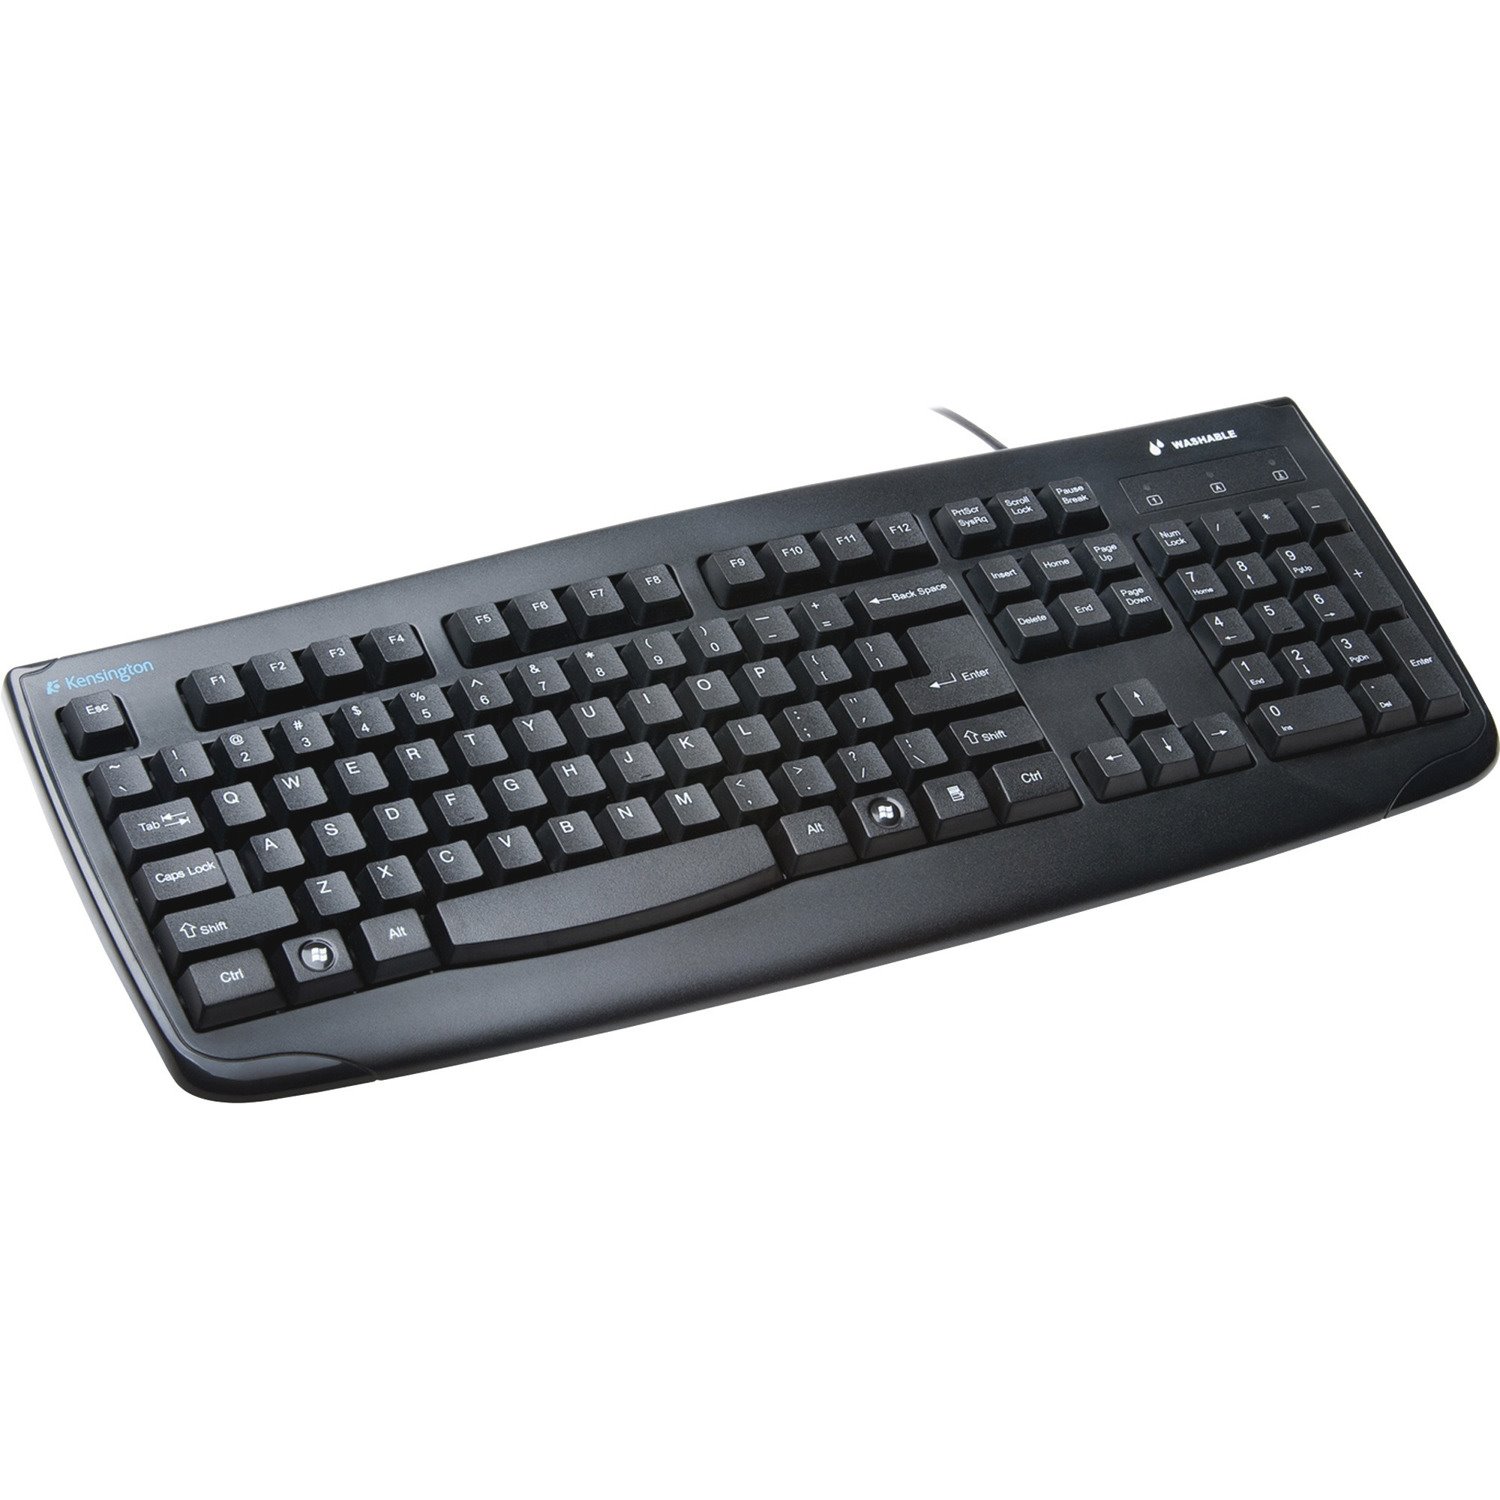 Kensington Pro Fit 64407 Keyboard - Cable Connectivity - USB Interface - Black